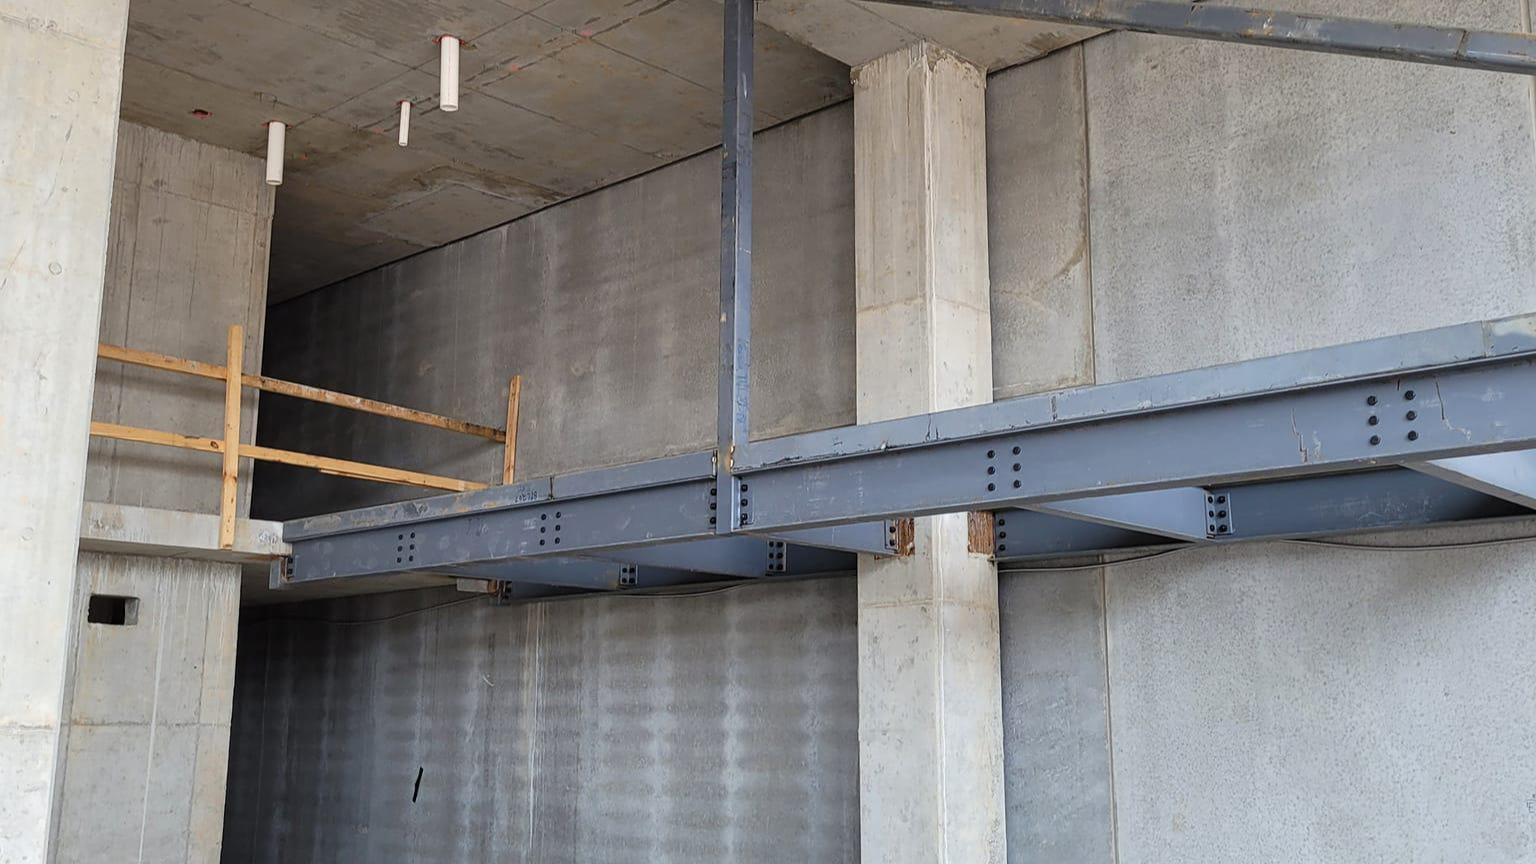 When it comes to structural welding, Top Notch Erection Company is your trusted partner. Our certified welders are experienced in joining structural components with precision and strength. We ensure that your projects are built to last, meeting all safety and structural integrity requirements.